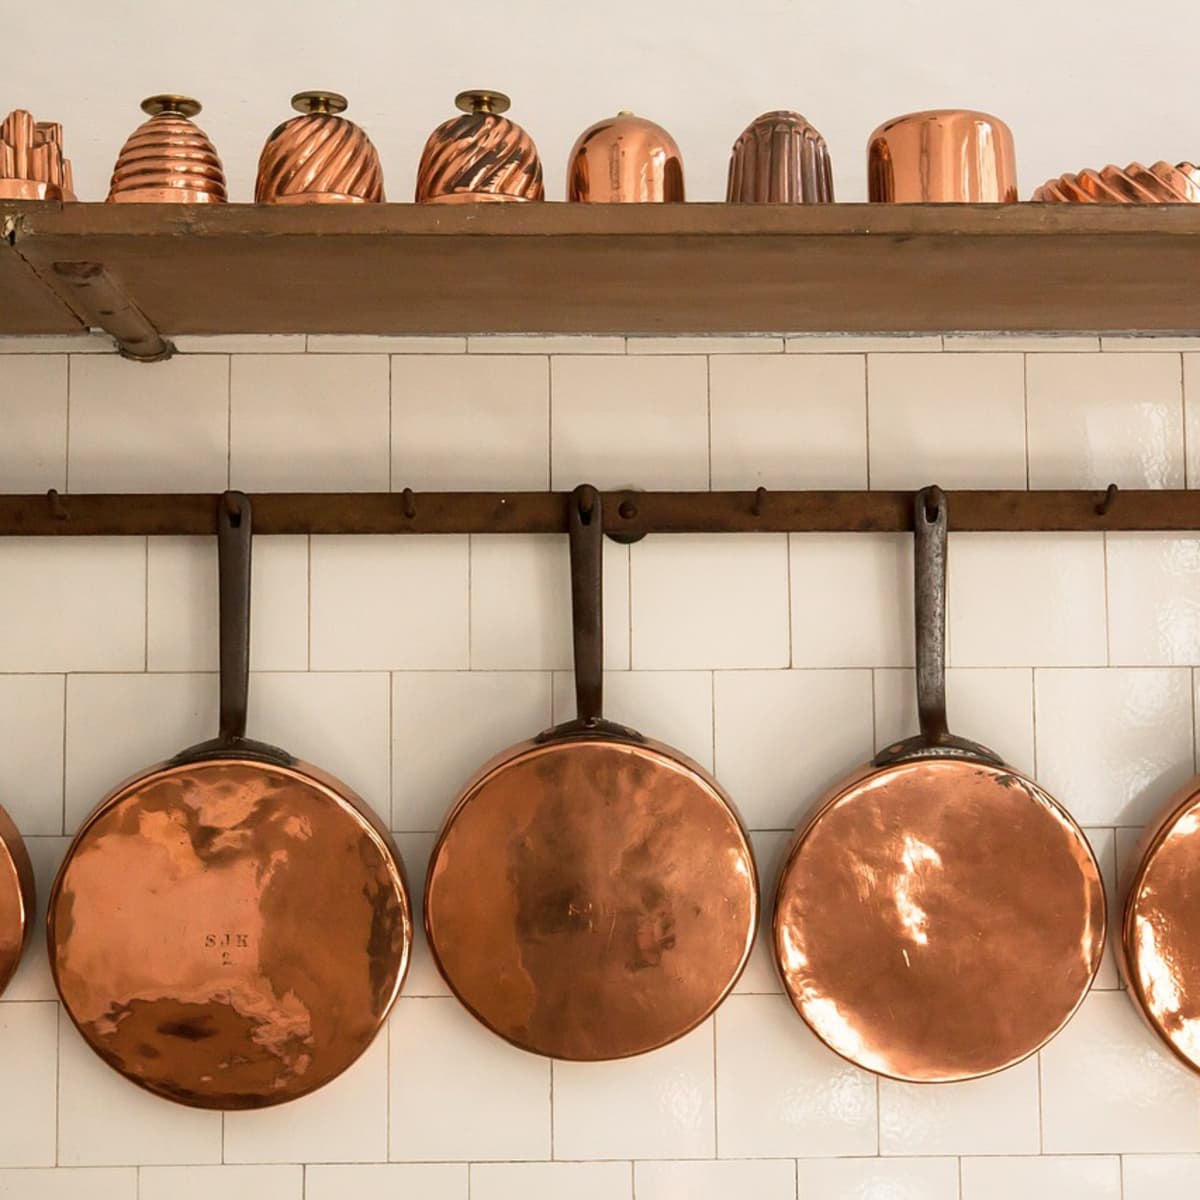 How to Cook With Copper Cookware - Made In